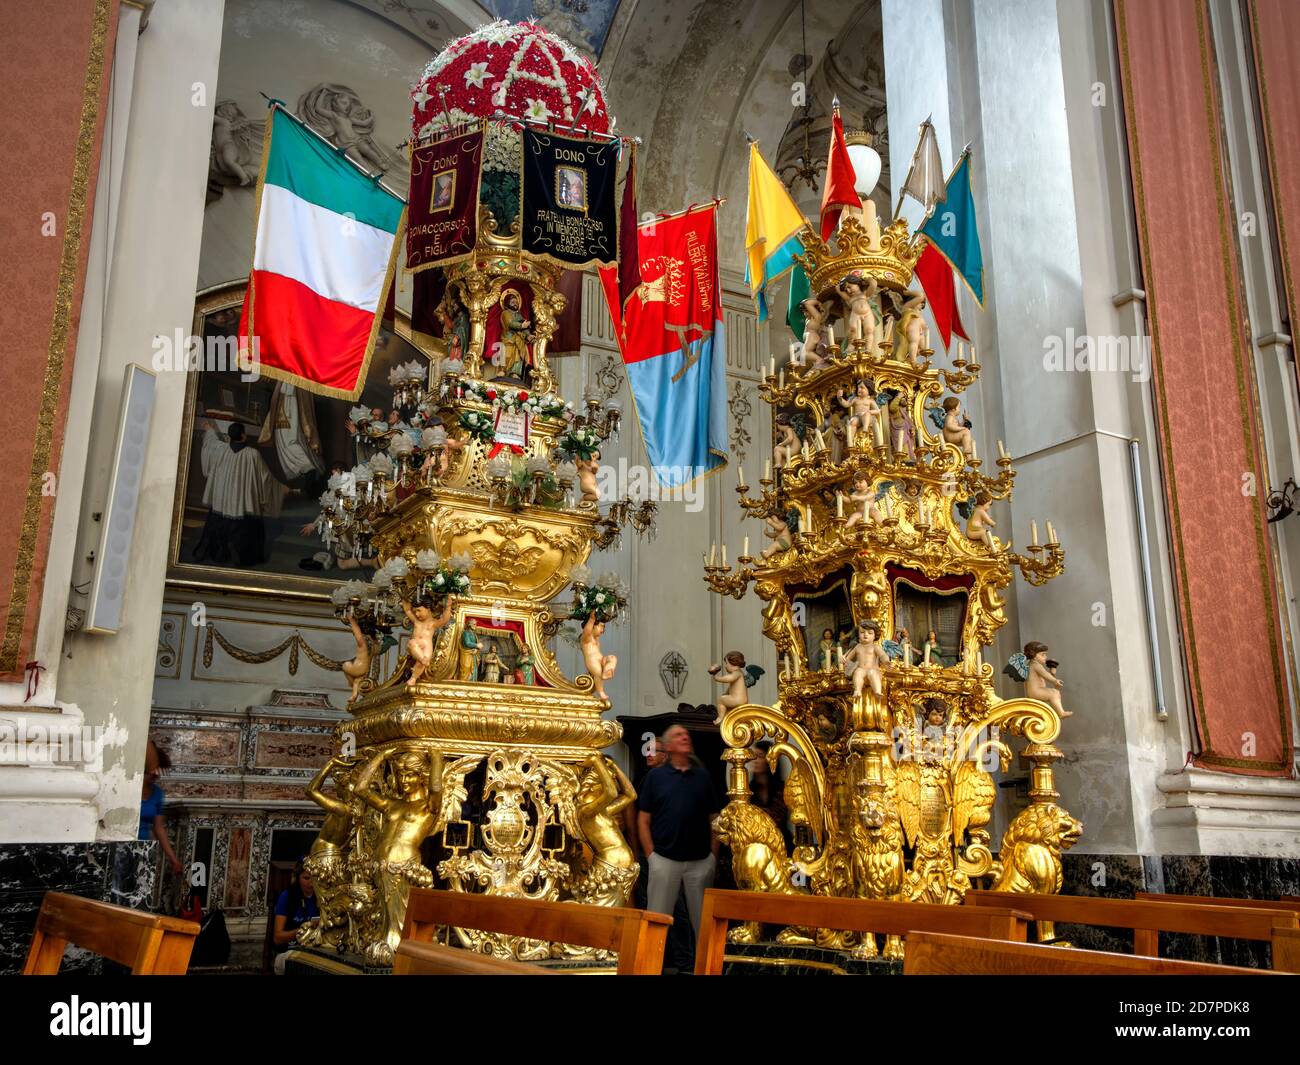 Candelore of st. Agata in Church of St. Francis of Assisi (Chiesa di San Francesco d'Assisi all'Immacolata).  Catania, Sicily, Italy Stock Photo